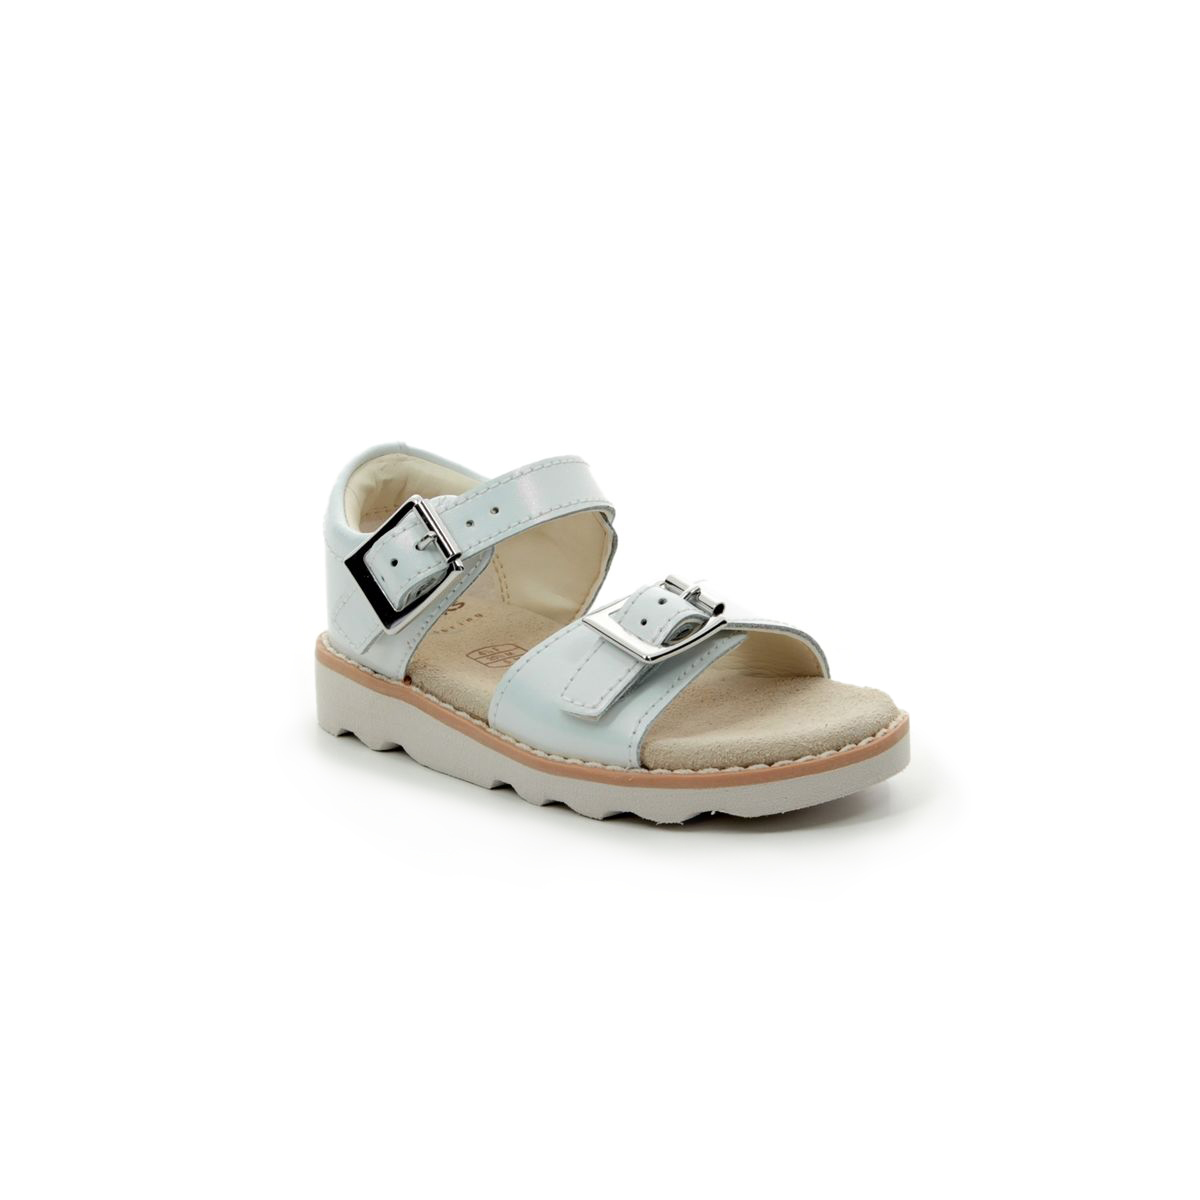 Clarks Crown Bloom T F Fit White sandals